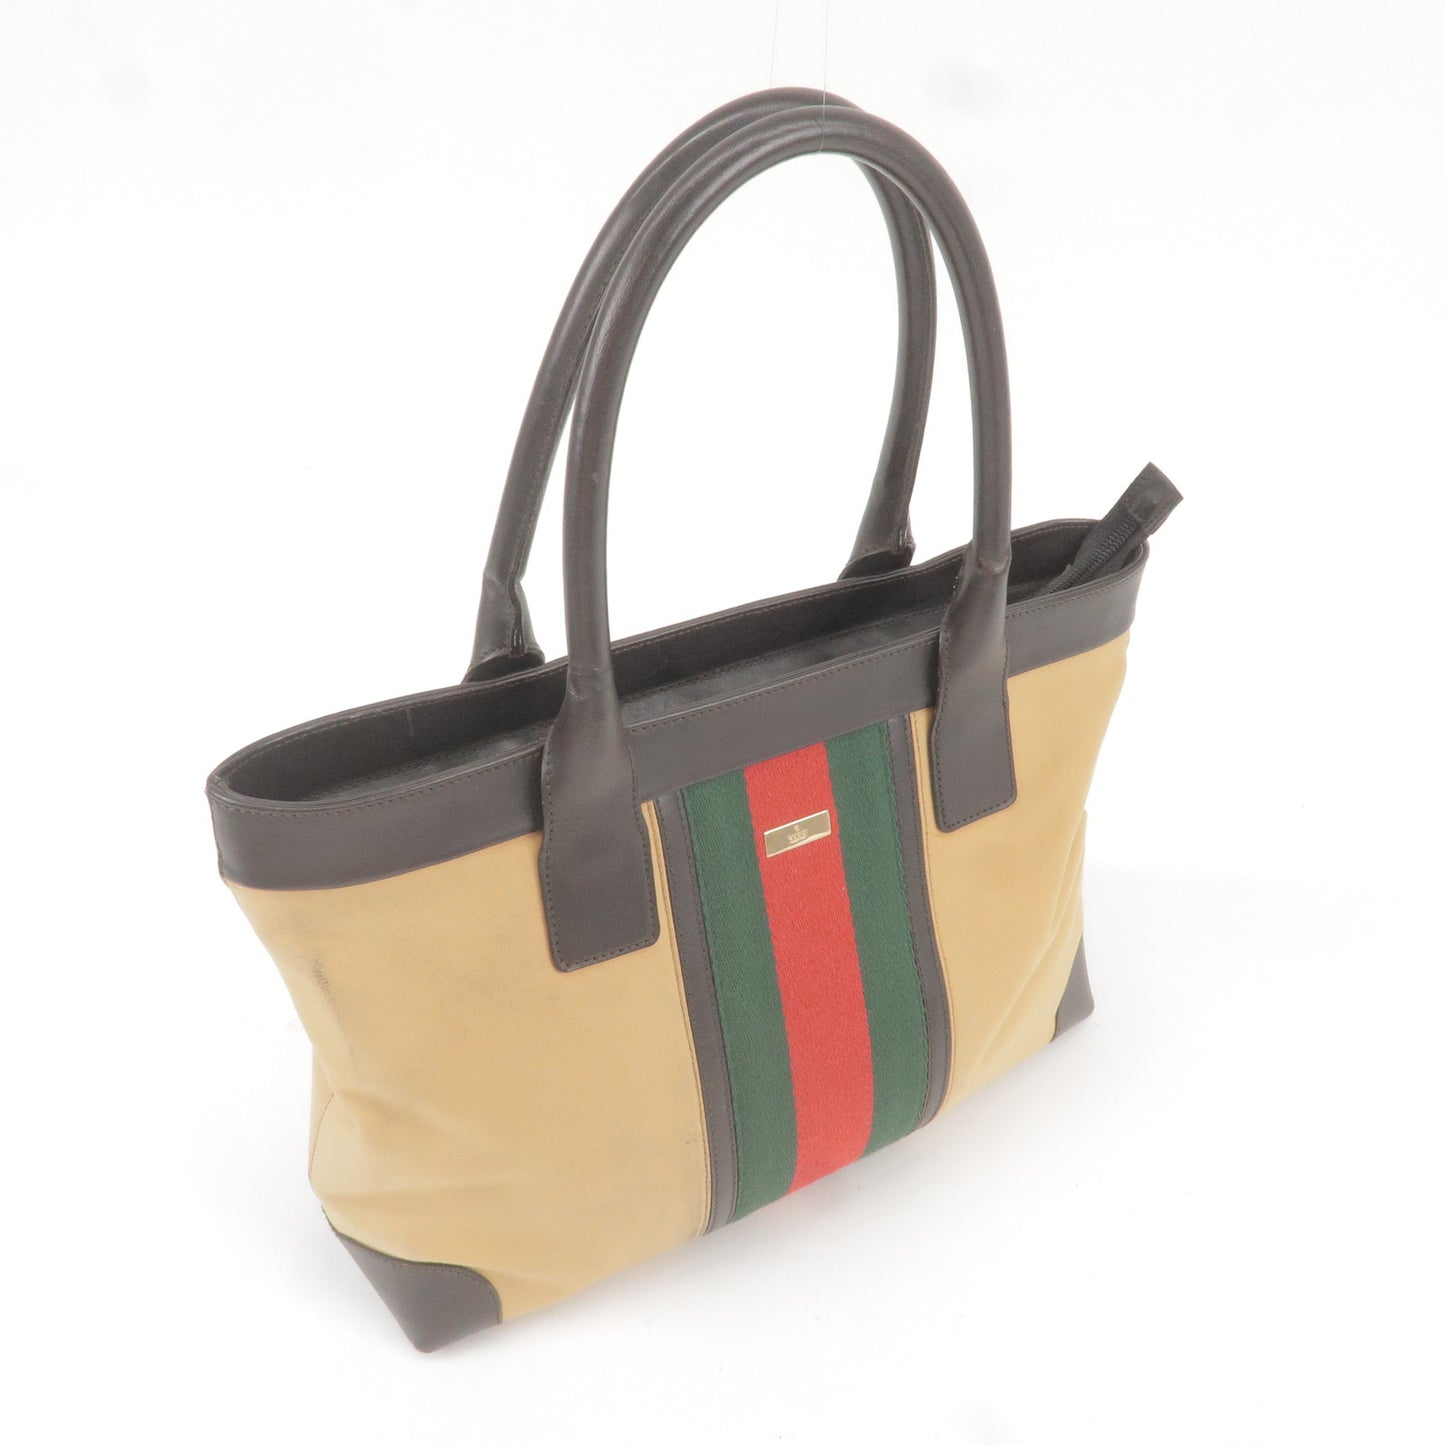 GUCCI Sherry Canvas Leather Tote Bag Hand Bag Beige 002.119